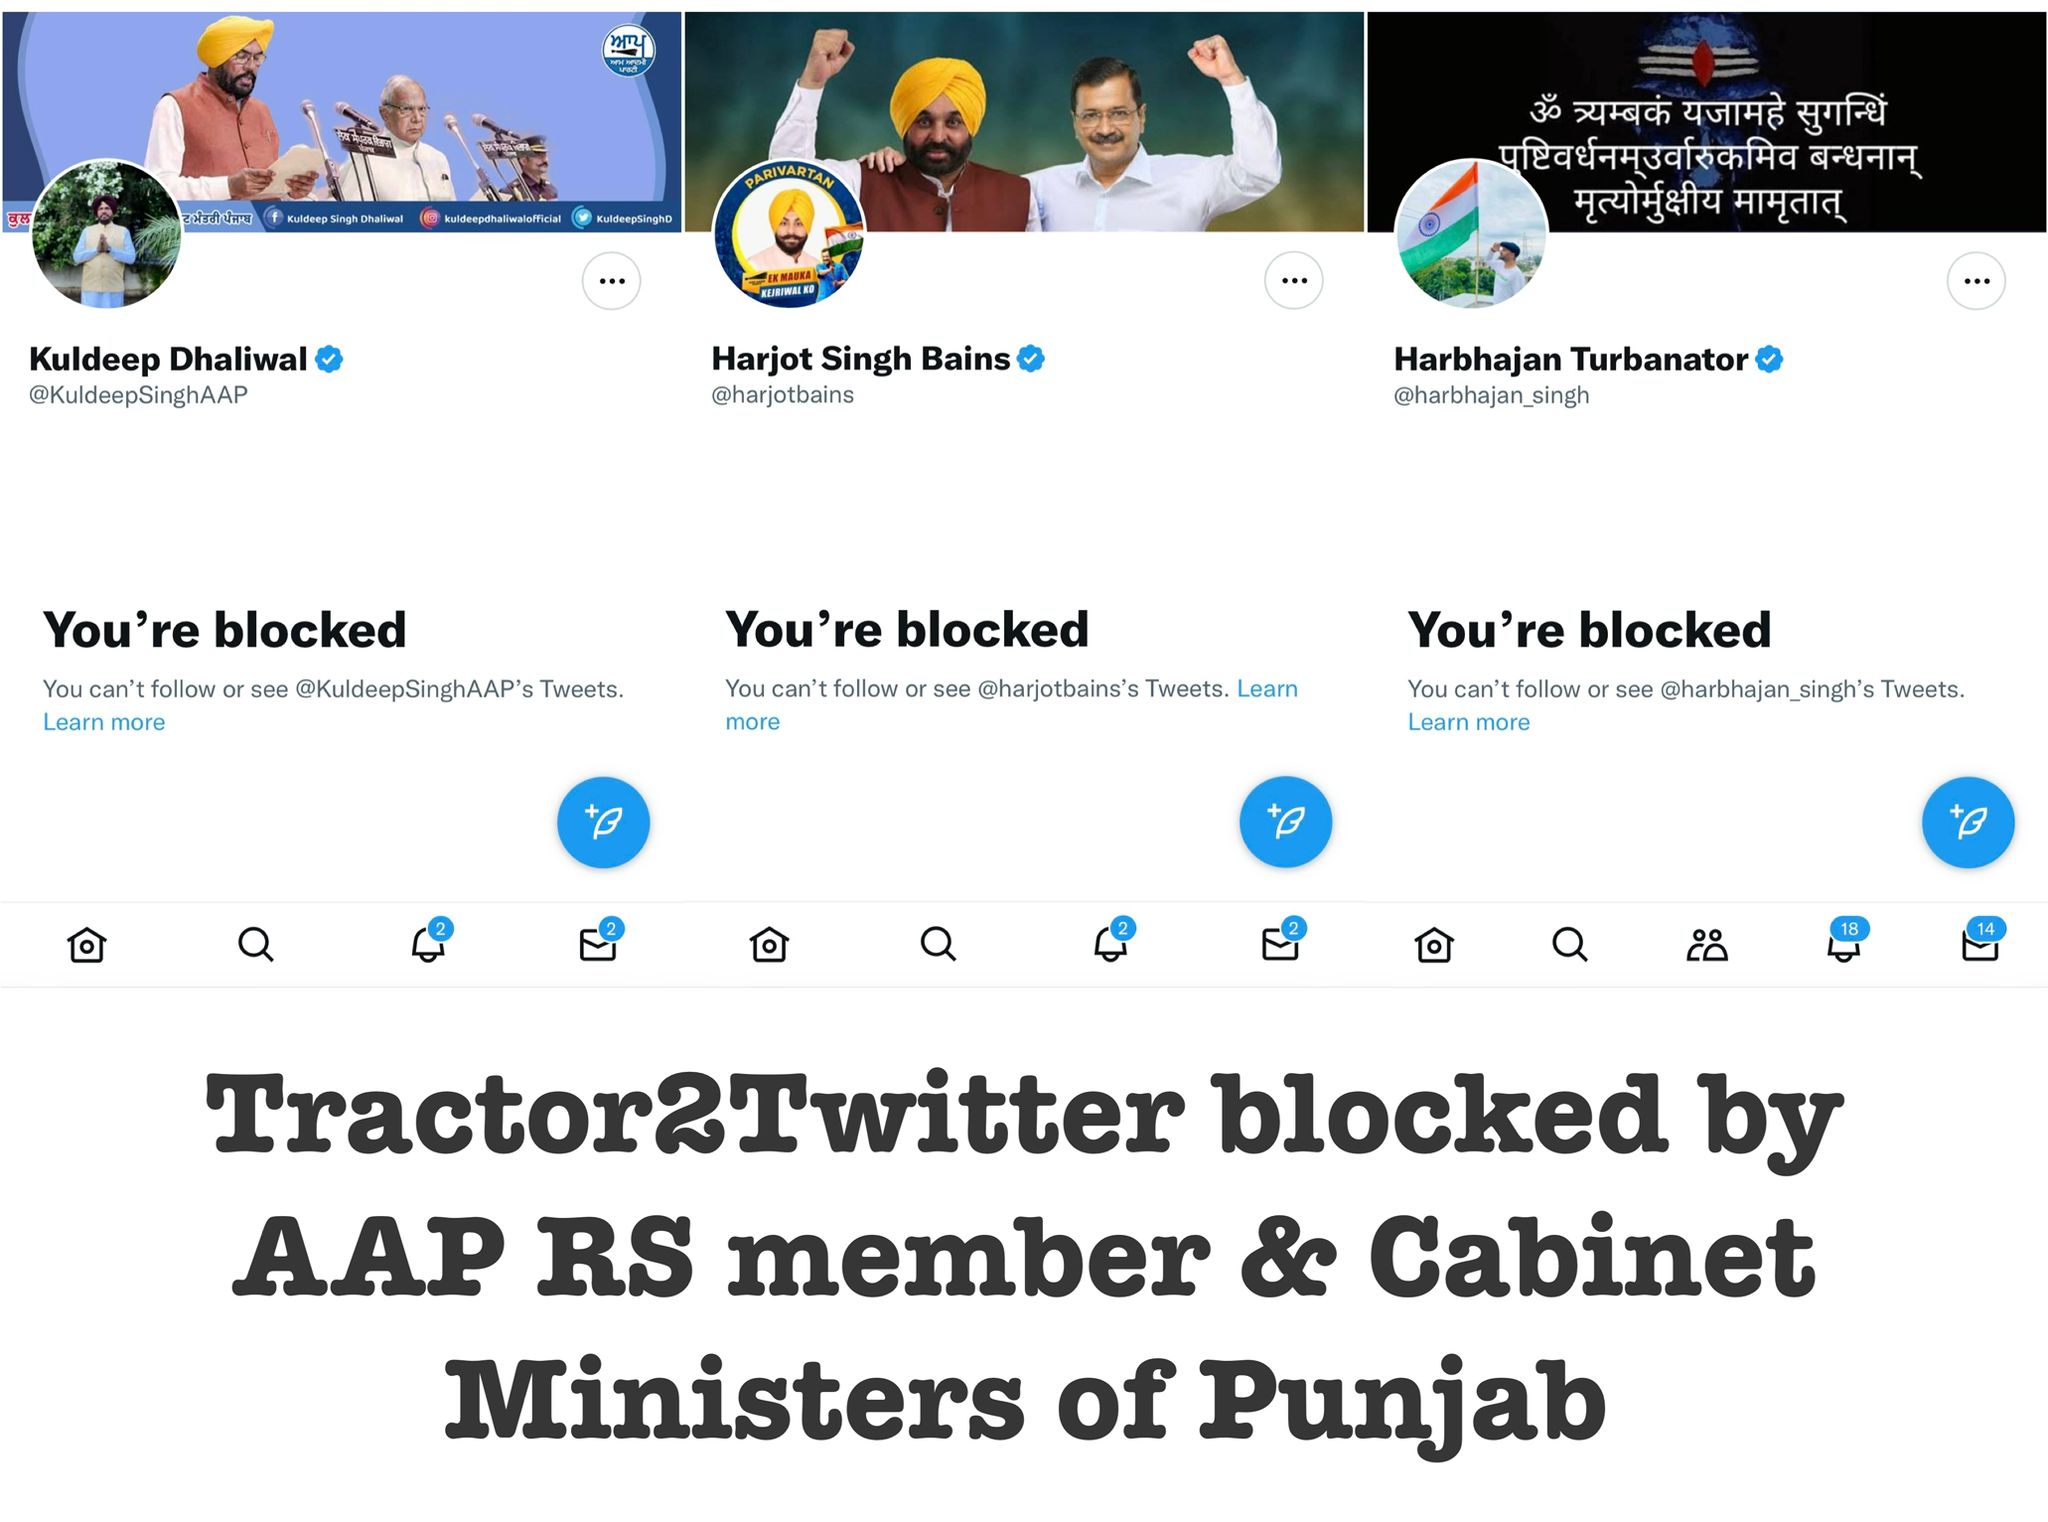 Zira agitation: Cabinet Ministers Kuldeep Dhaliwal and Harjot Bains block Tractor 2 twitter account-alleges the team operating it